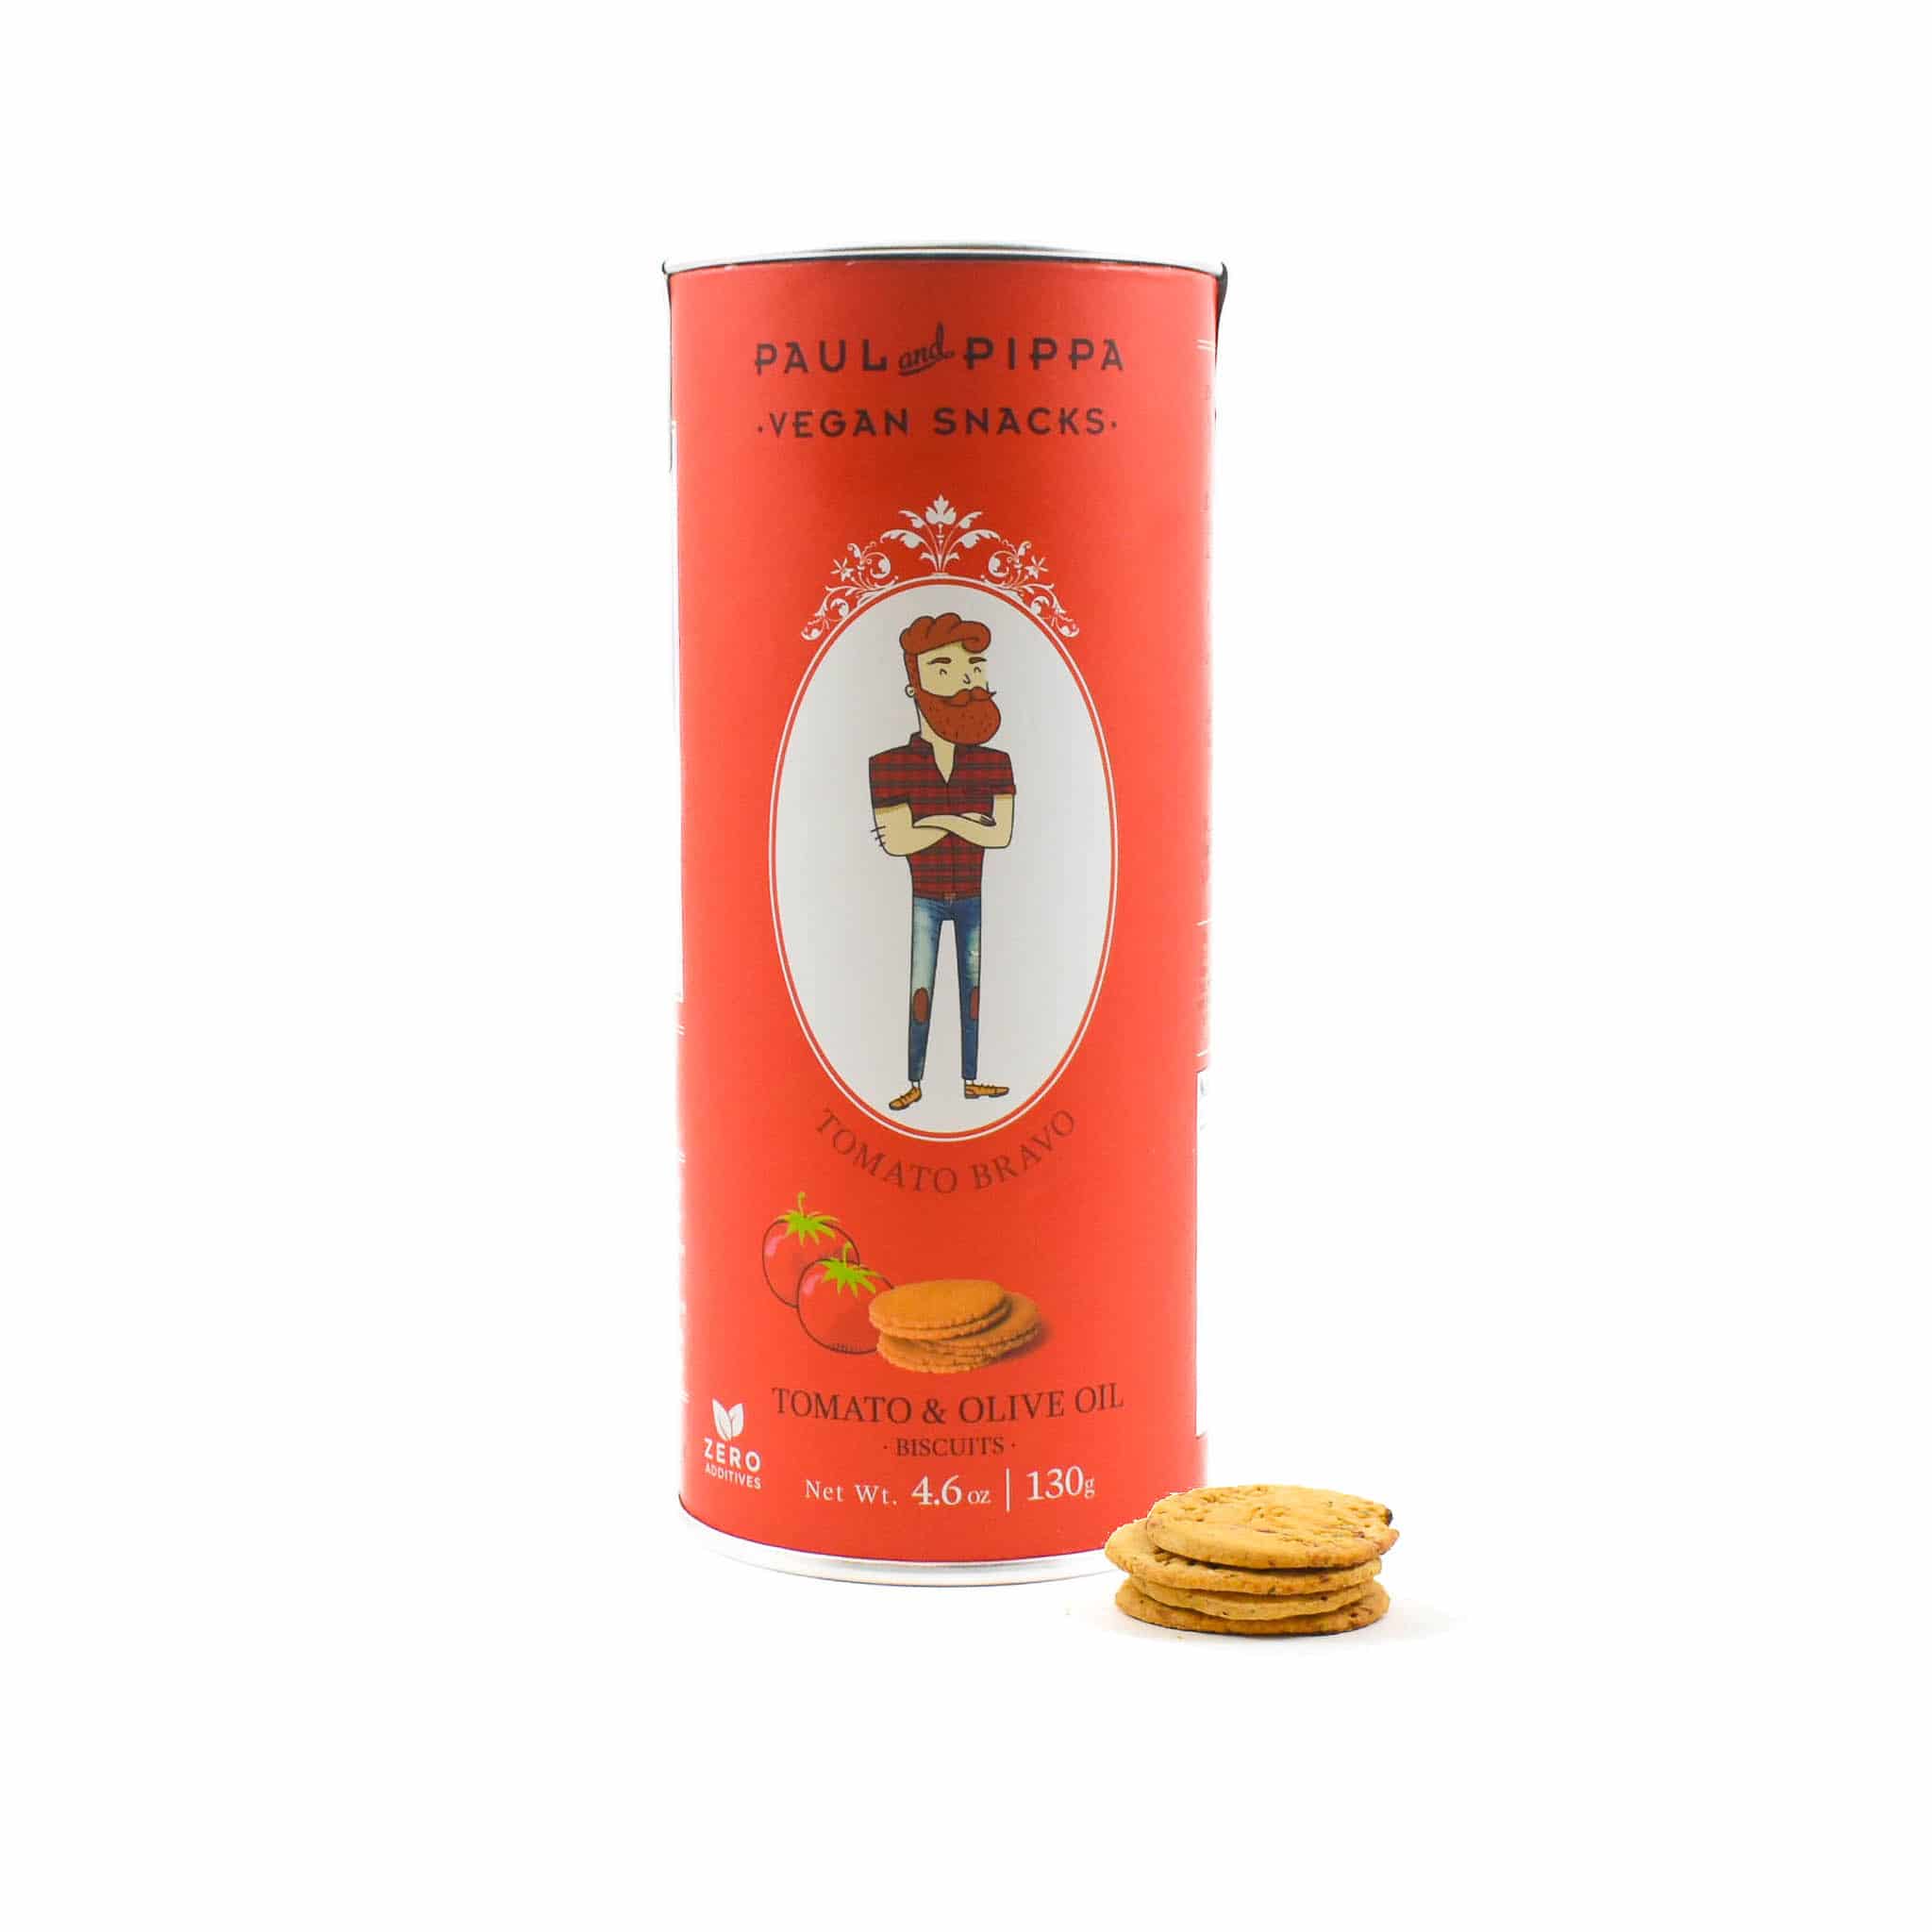 Sundried Tomato Biscuits with Olive Oil & Oregano, 130g